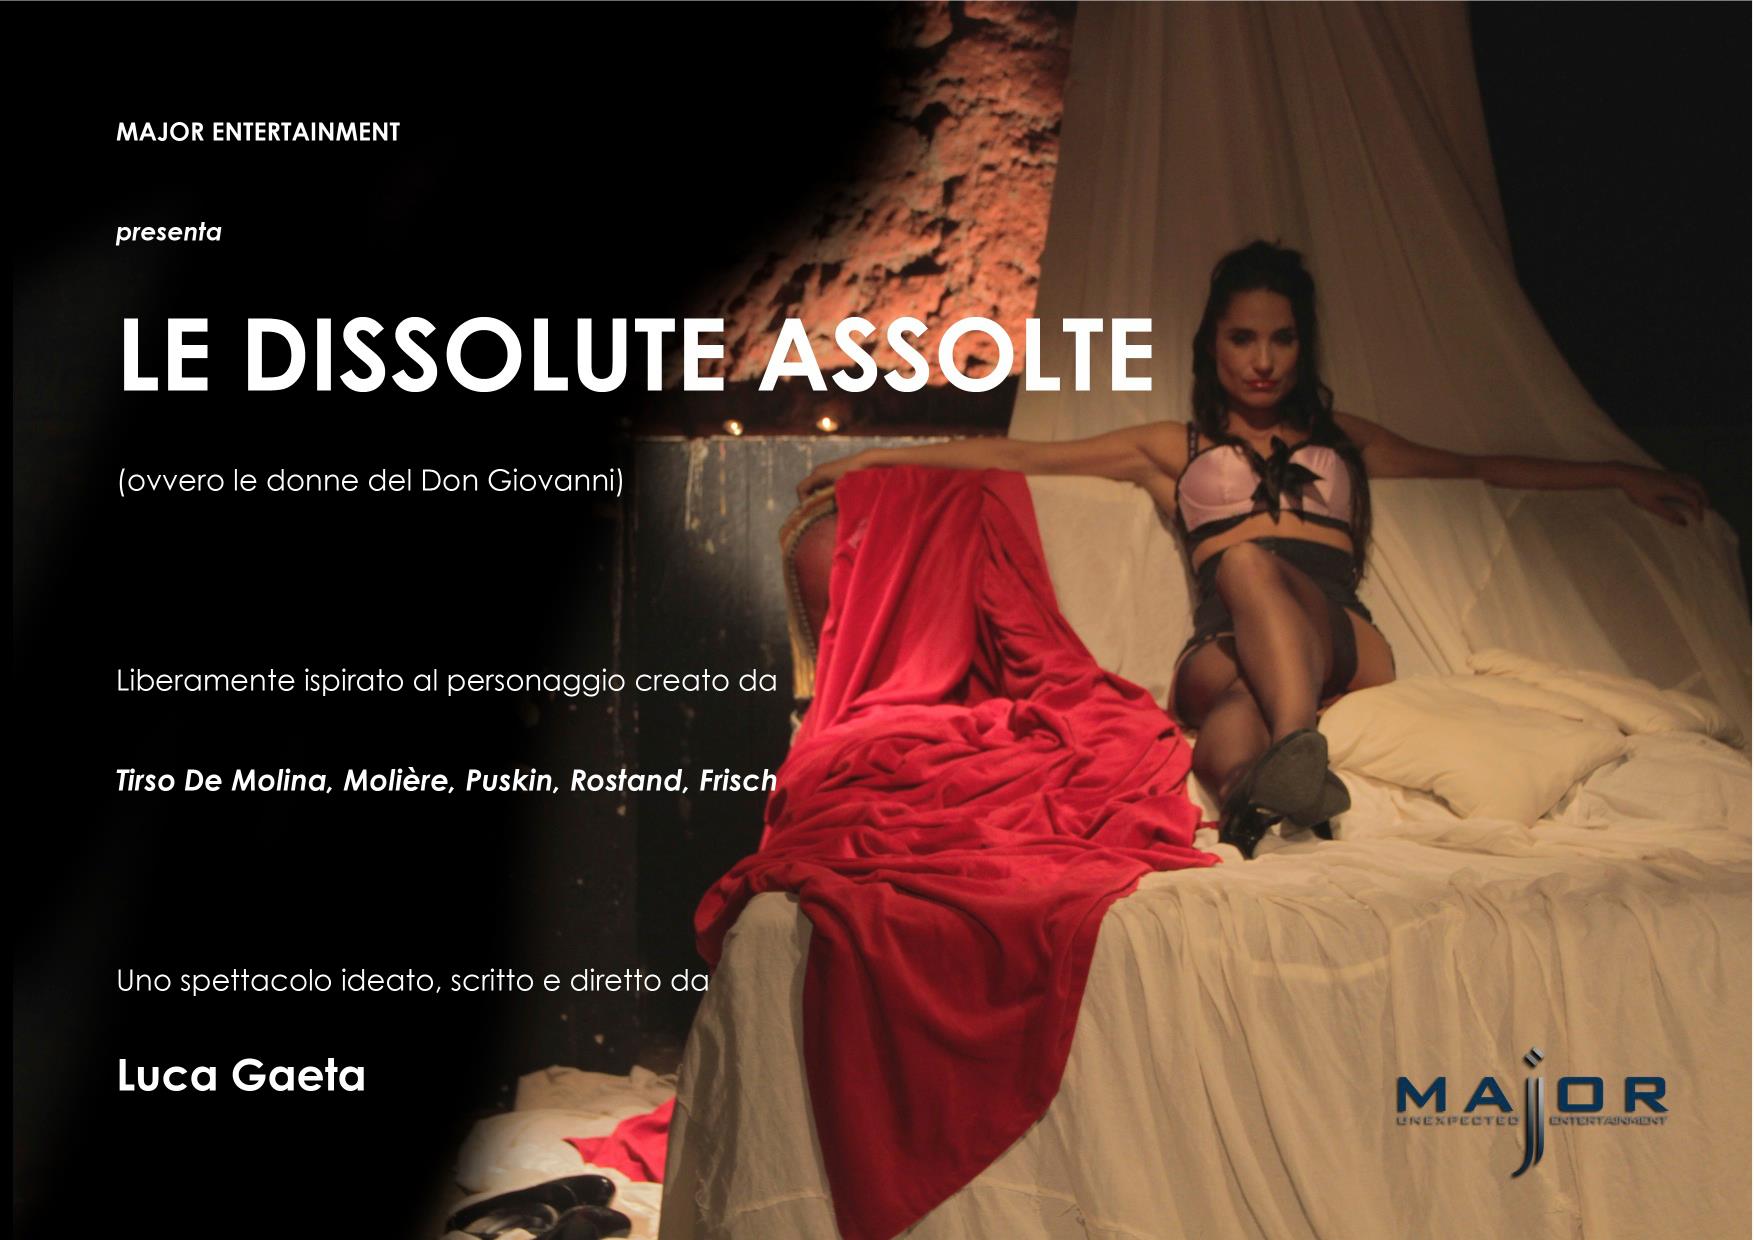 Promotional poster for Le Dissolute Assolte (Italian), the acclaimed theatrical production directed by Luca Gate in Rome, Italy.